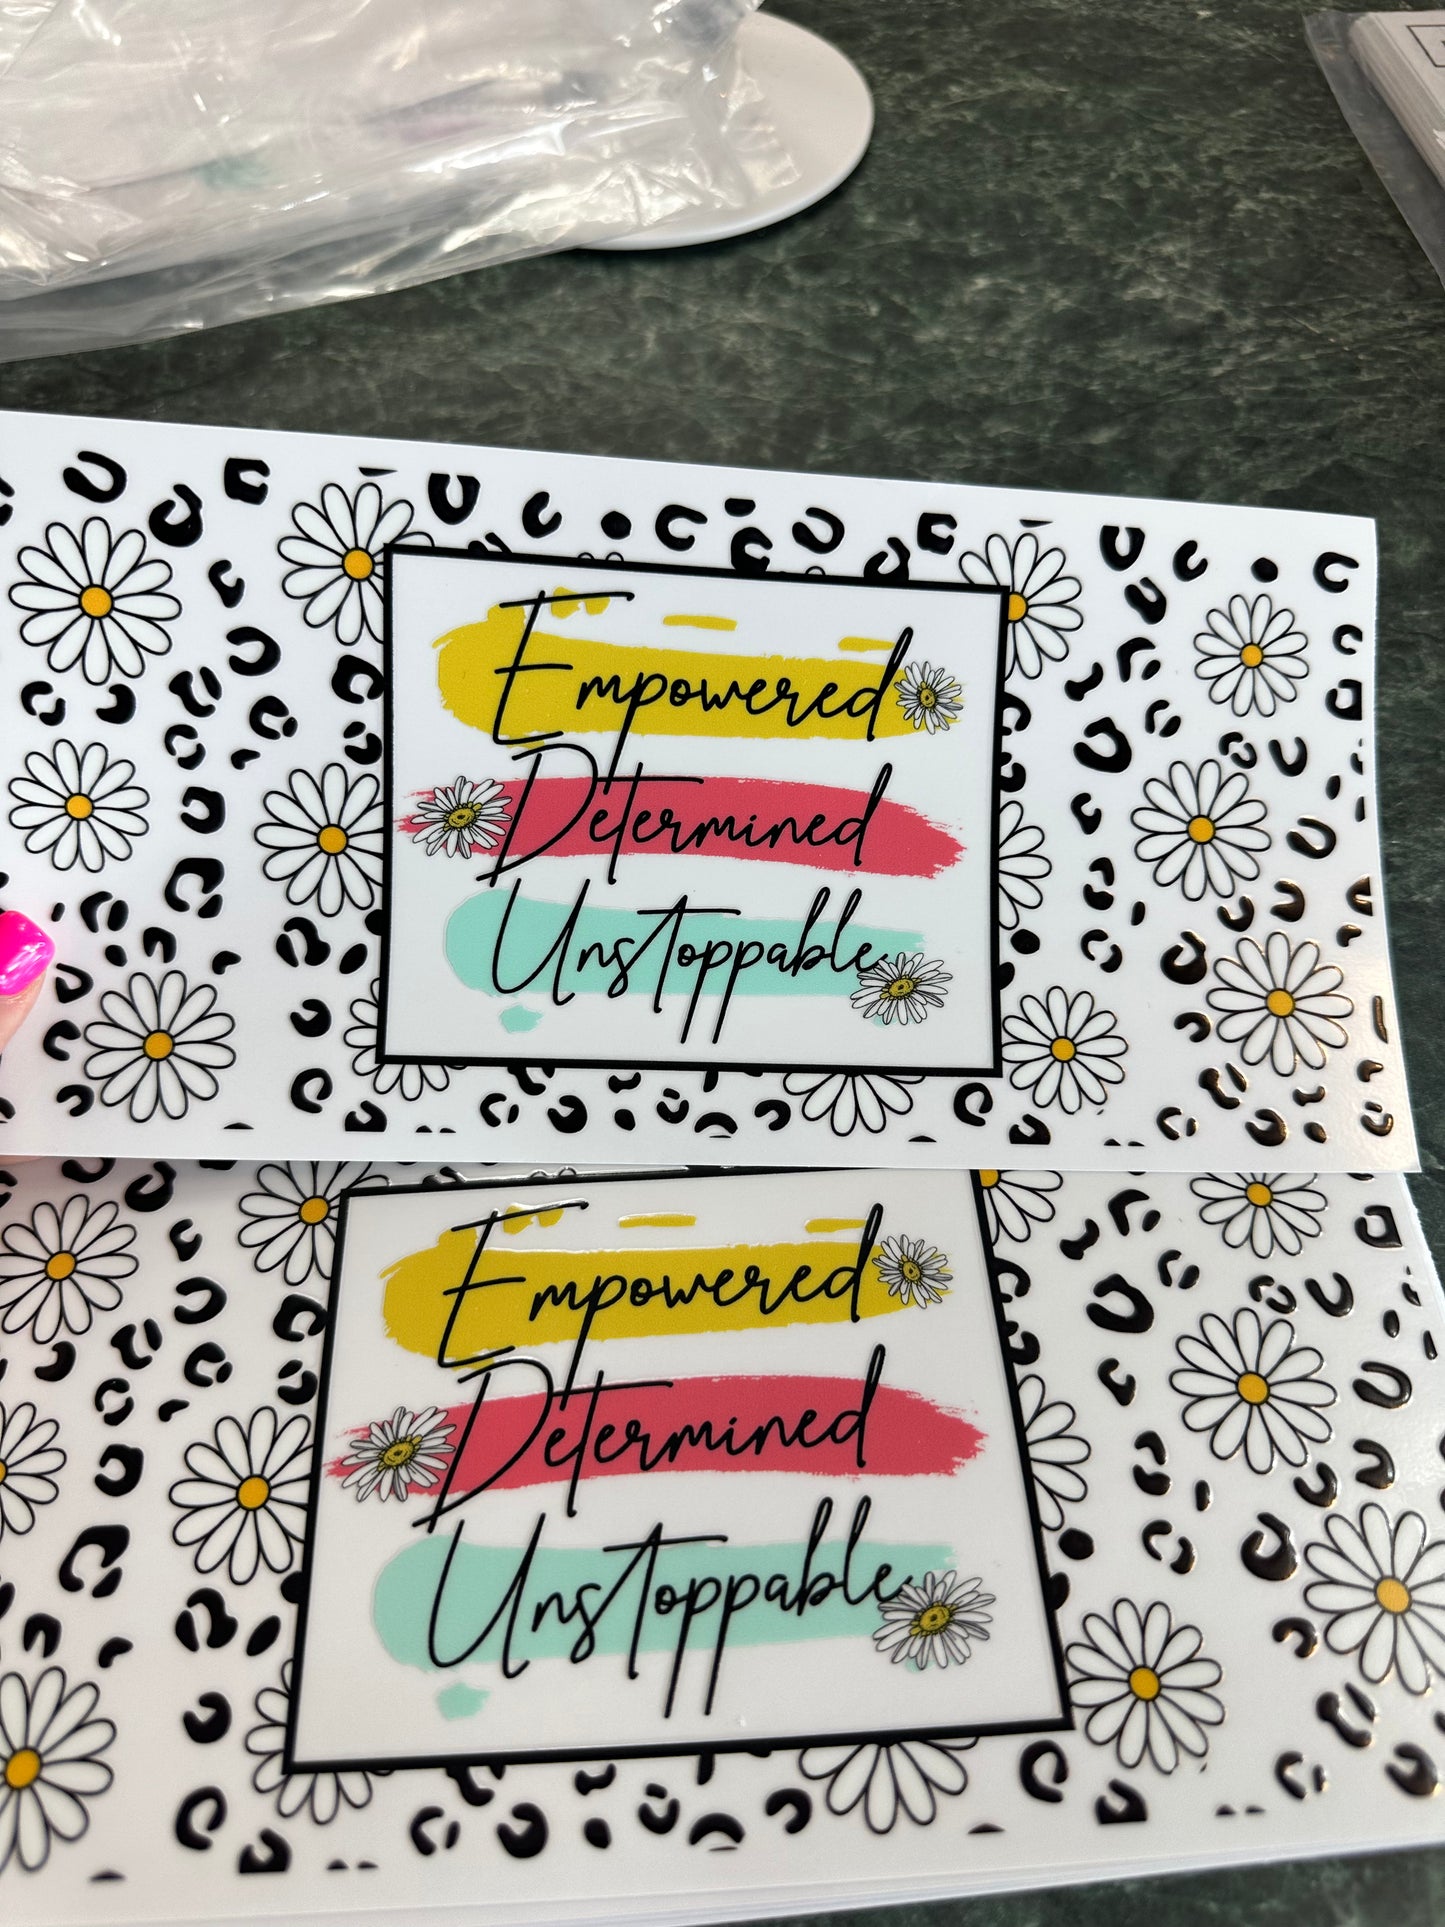 Empowered Determined Unstoppable UV DTF Wrap